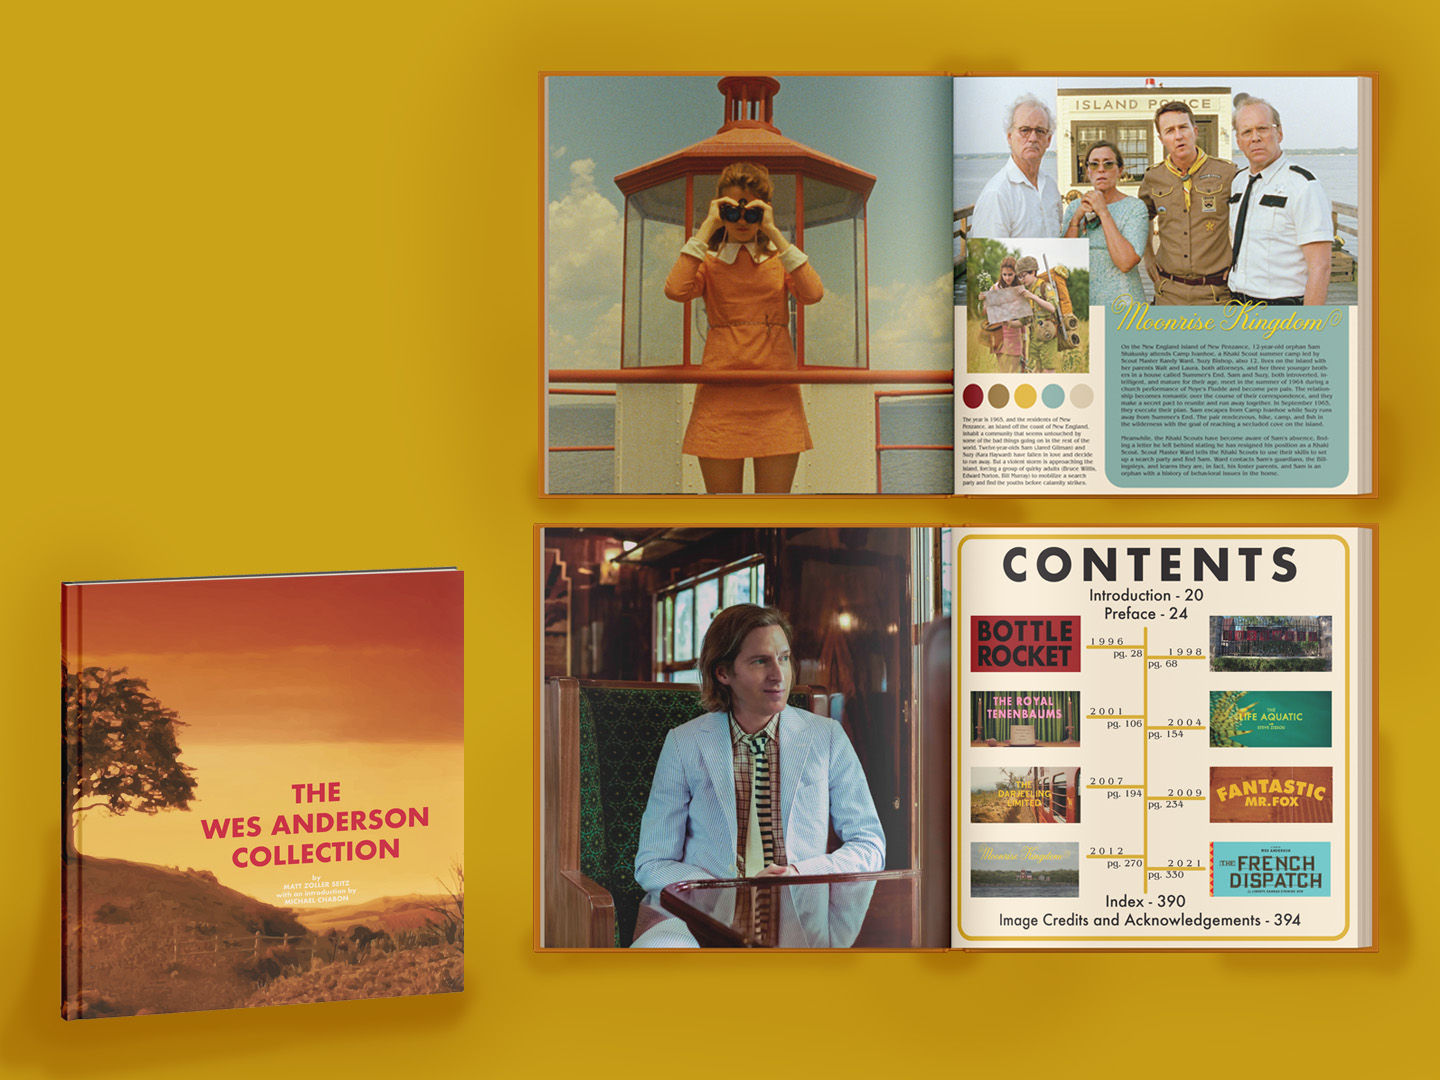  / “The Wes Anderson Collection” Coffee table book 10 x 10 inches, 2021. This book has editorial design spreads for each of Wes Anderson’s most famous movies. Image 1/2 